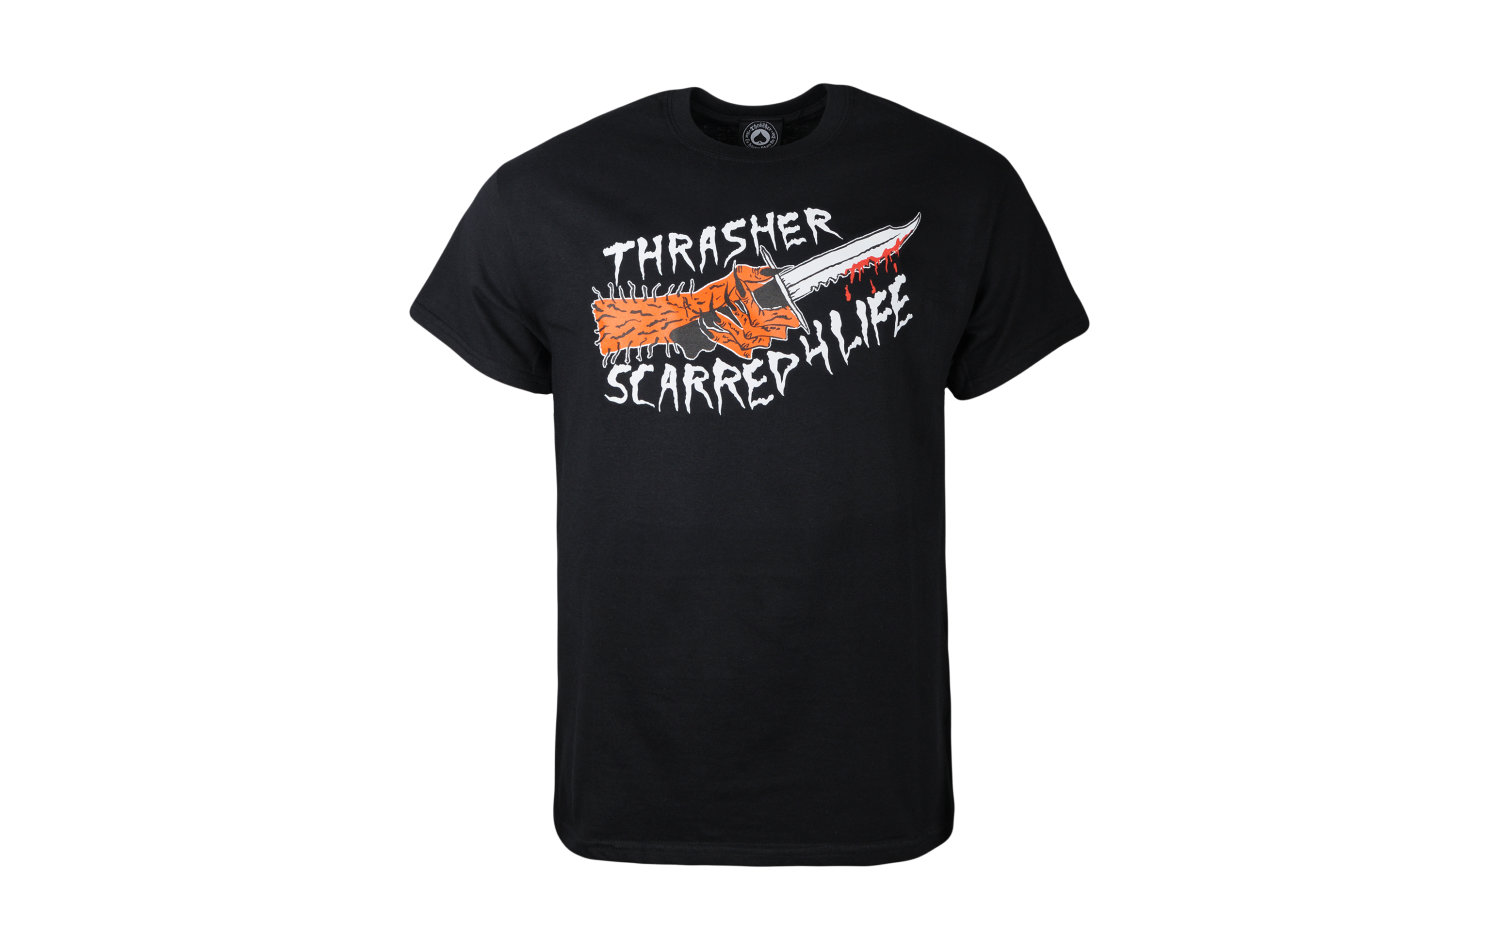 Thrasher Scarred S/S (394332-BLK)